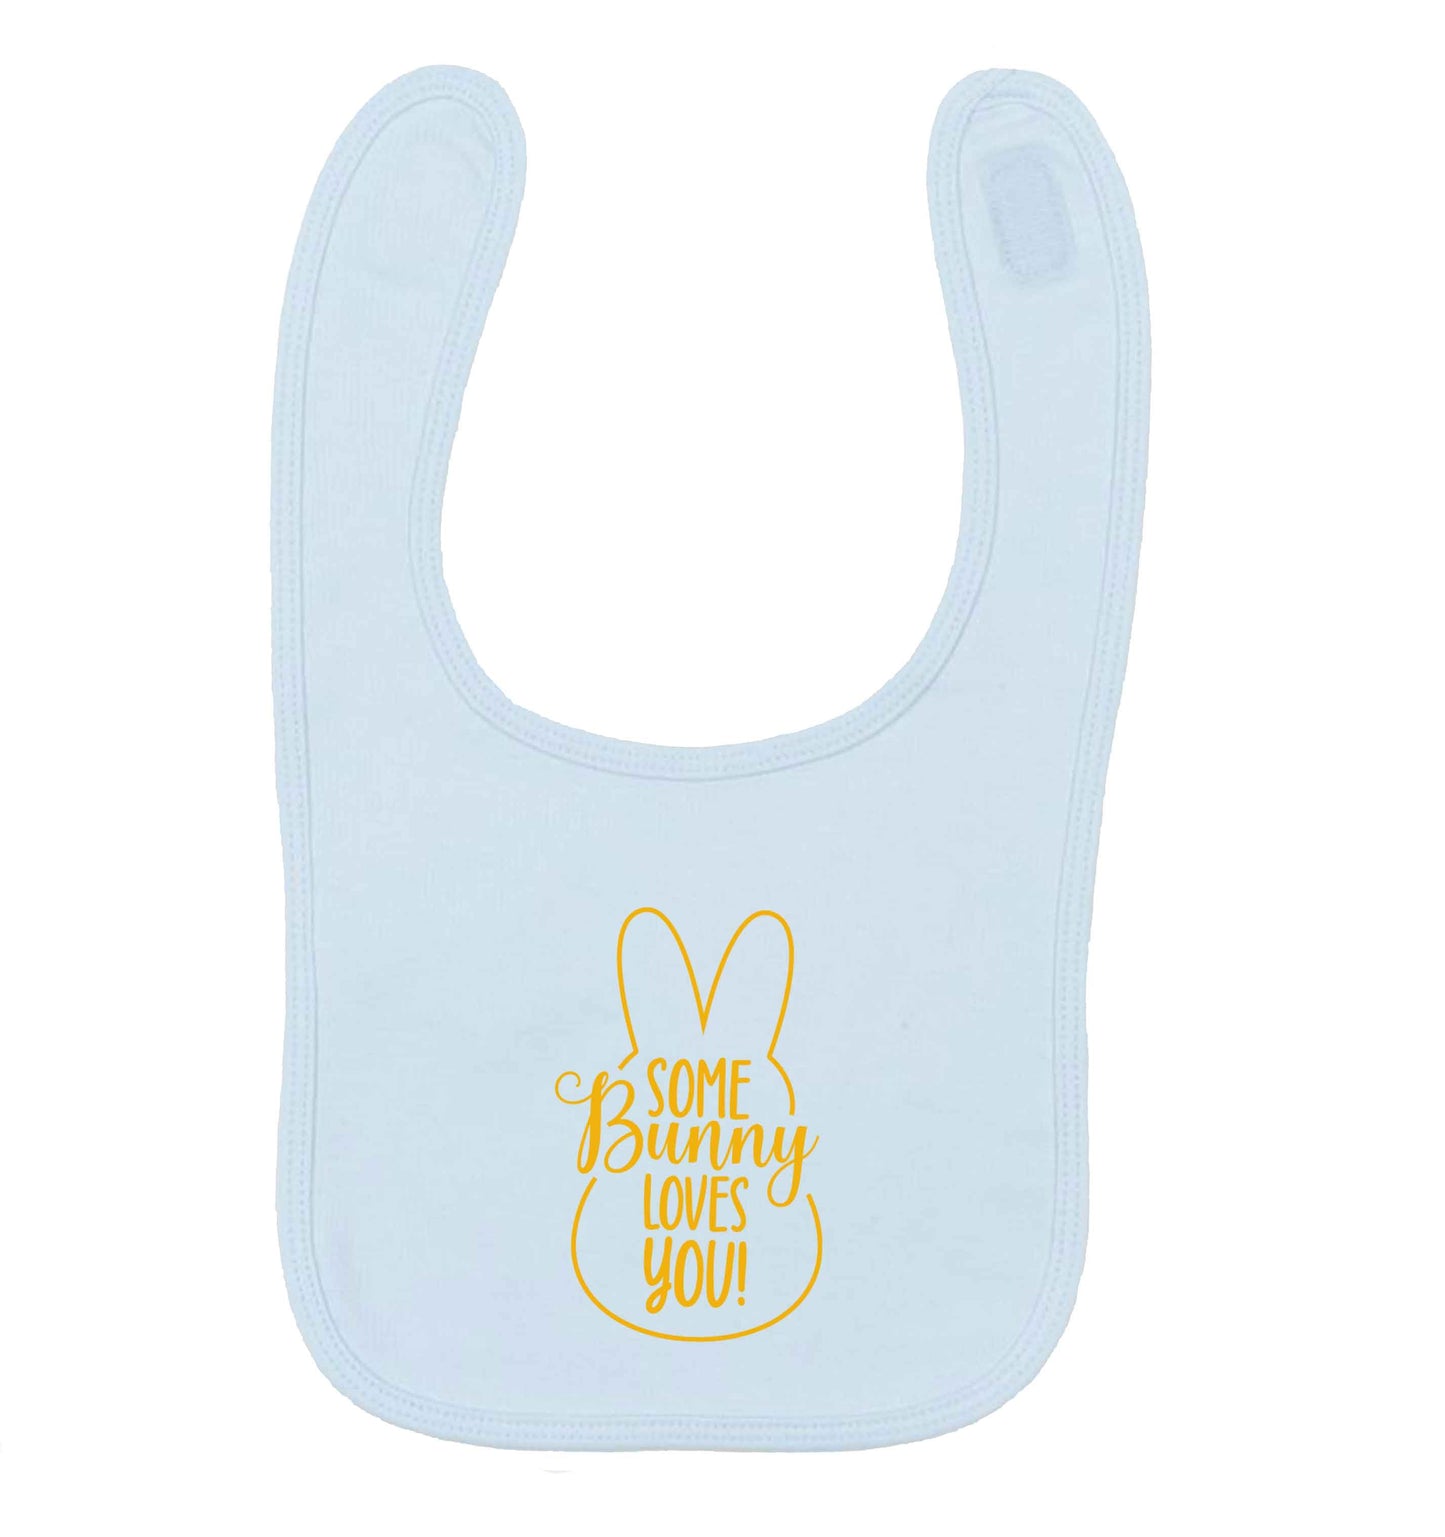 Some bunny loves you pale blue baby bib